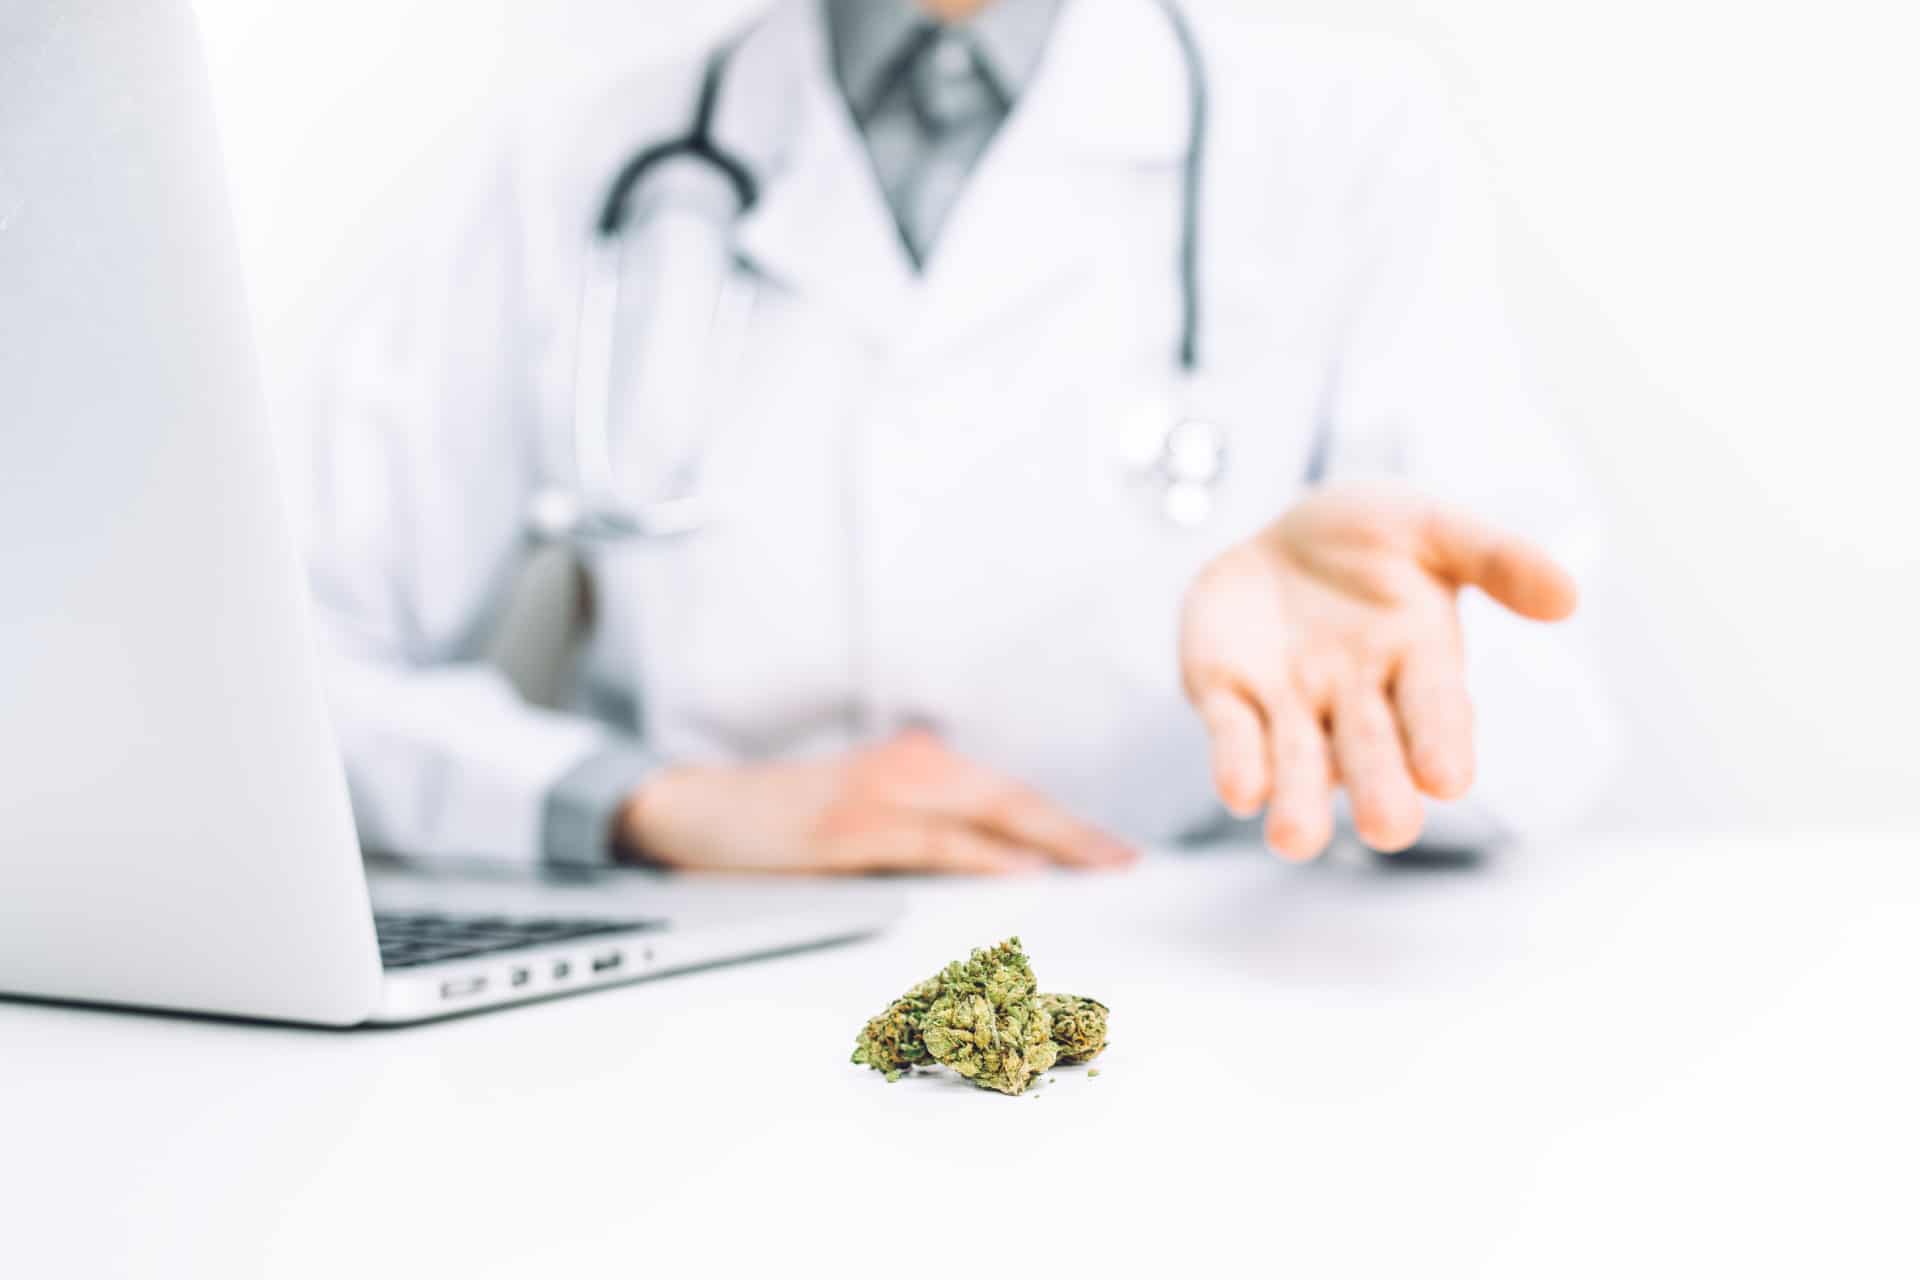 Physician in background pointing to cannabis flower in foreground as a recommendation for pain.